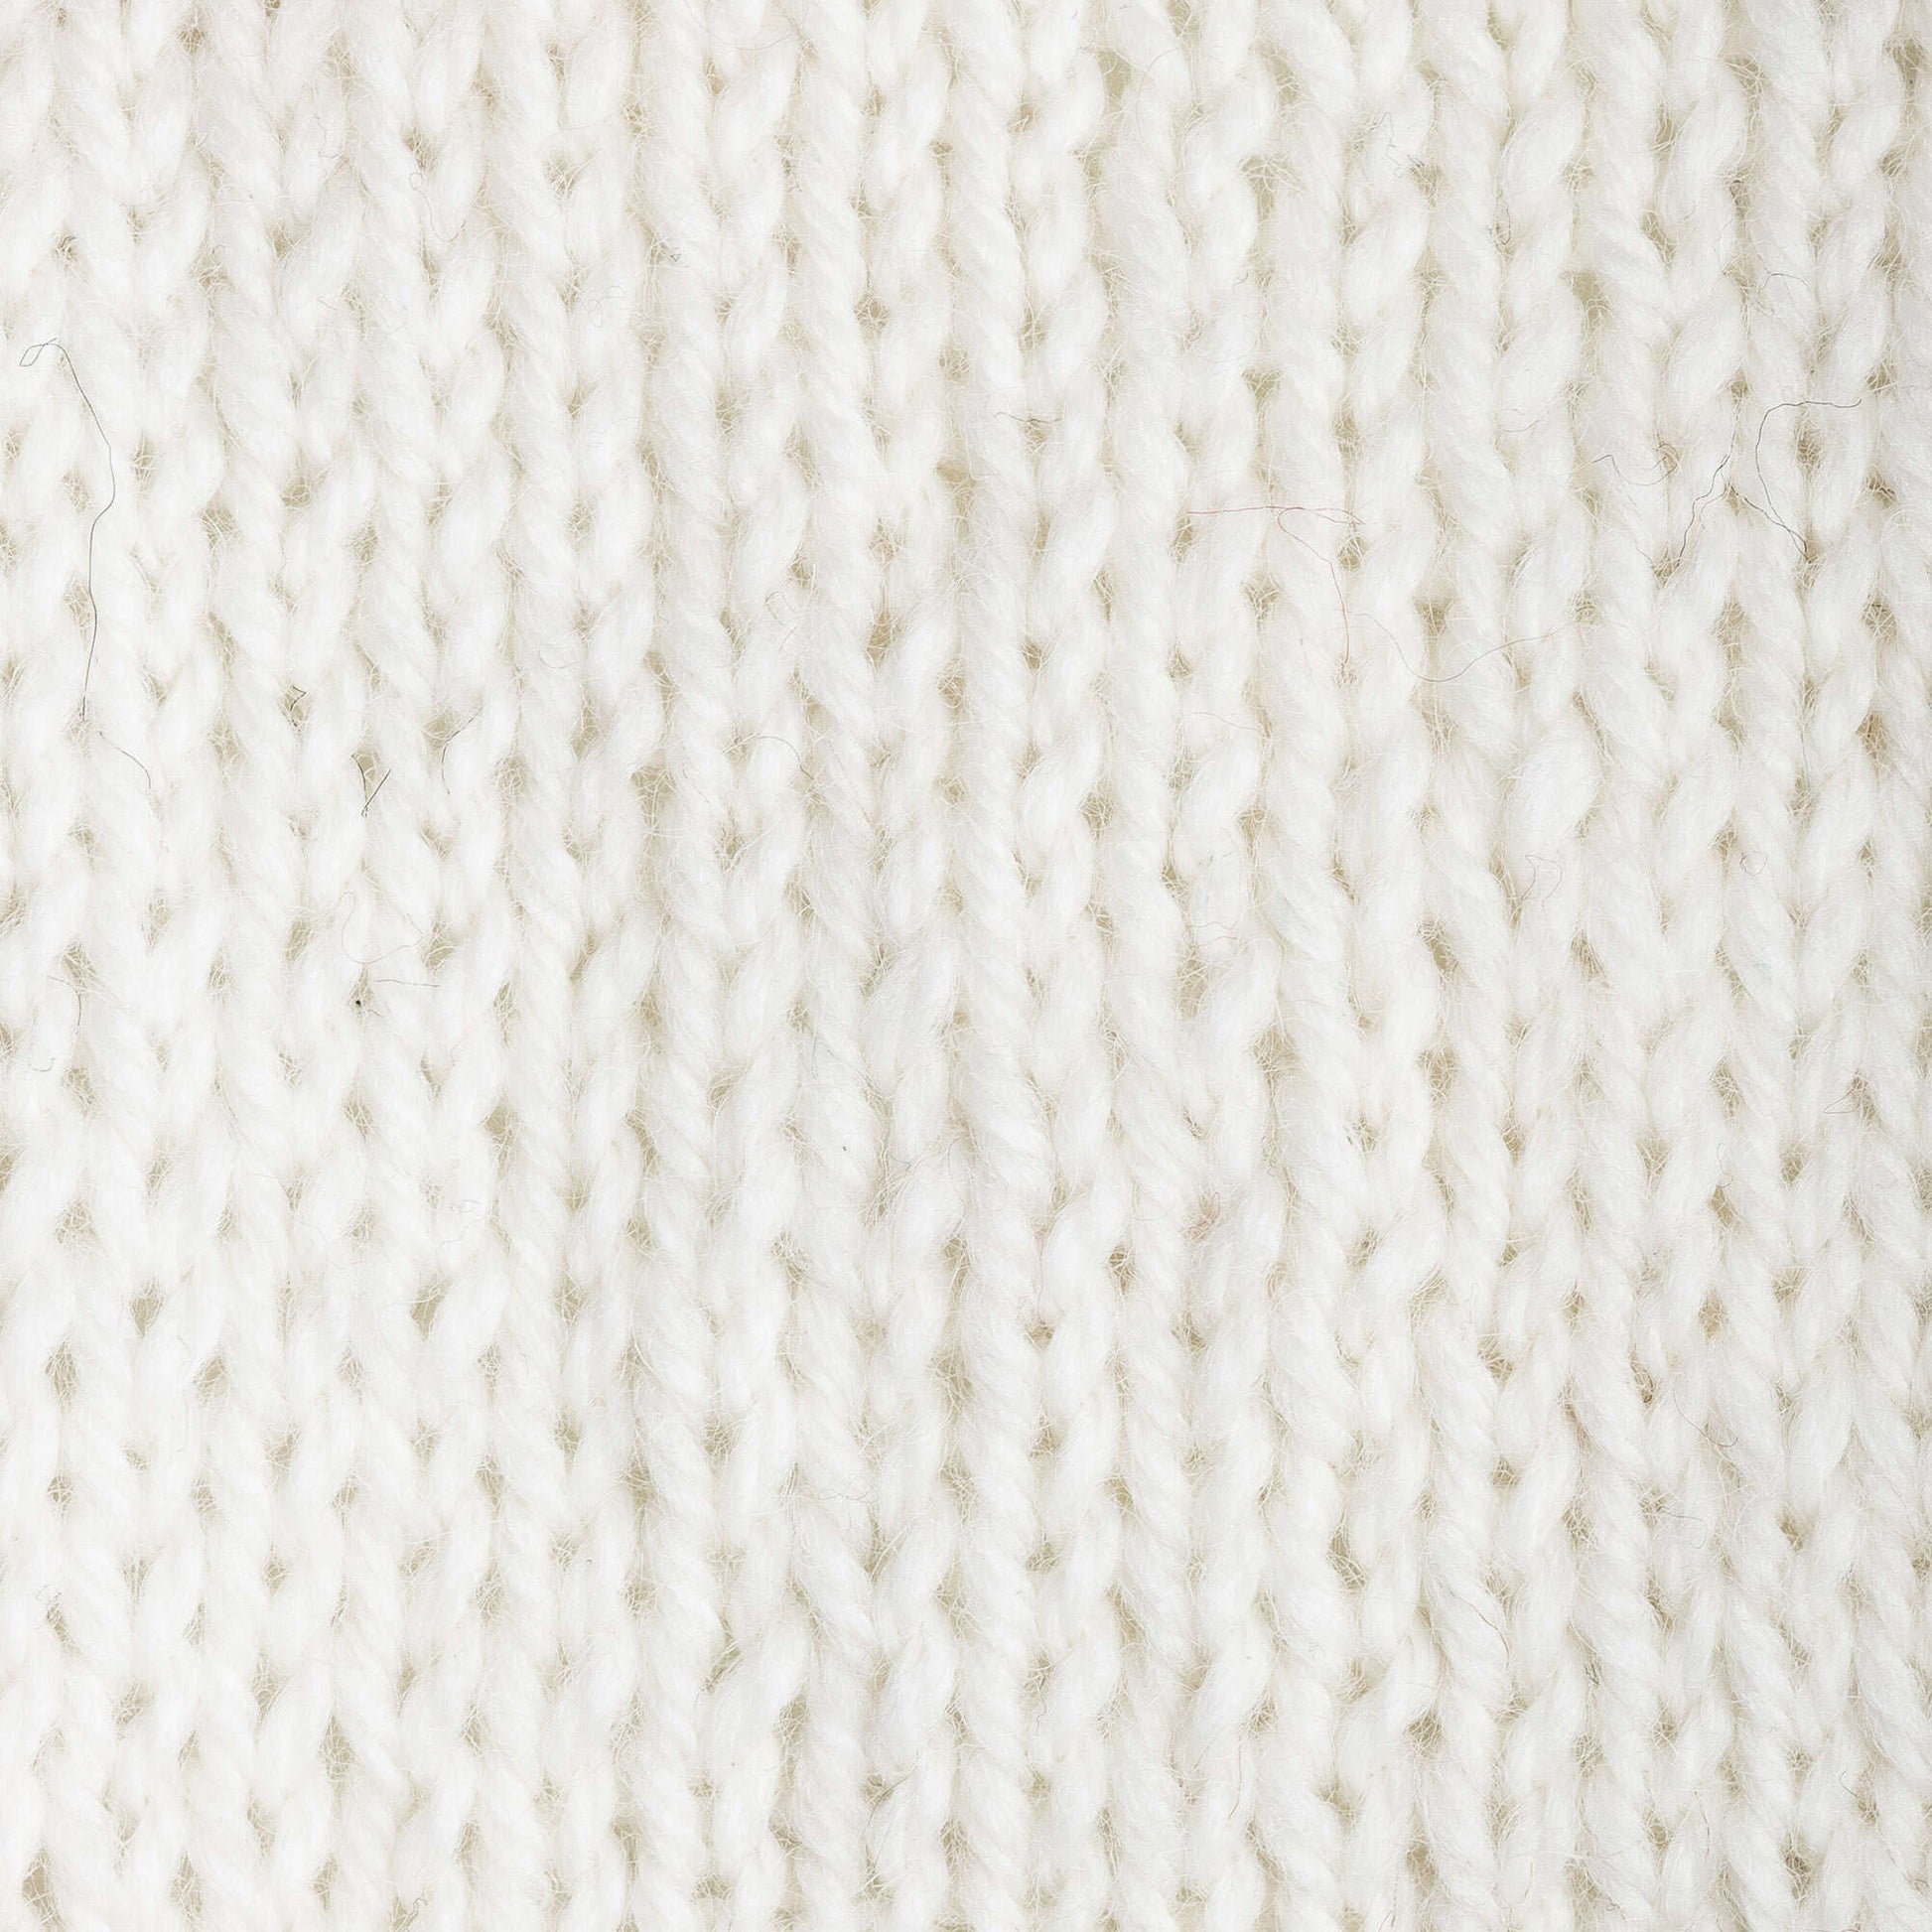 Background Texture Elegant White Embroidery Floss, Wool, Yarn